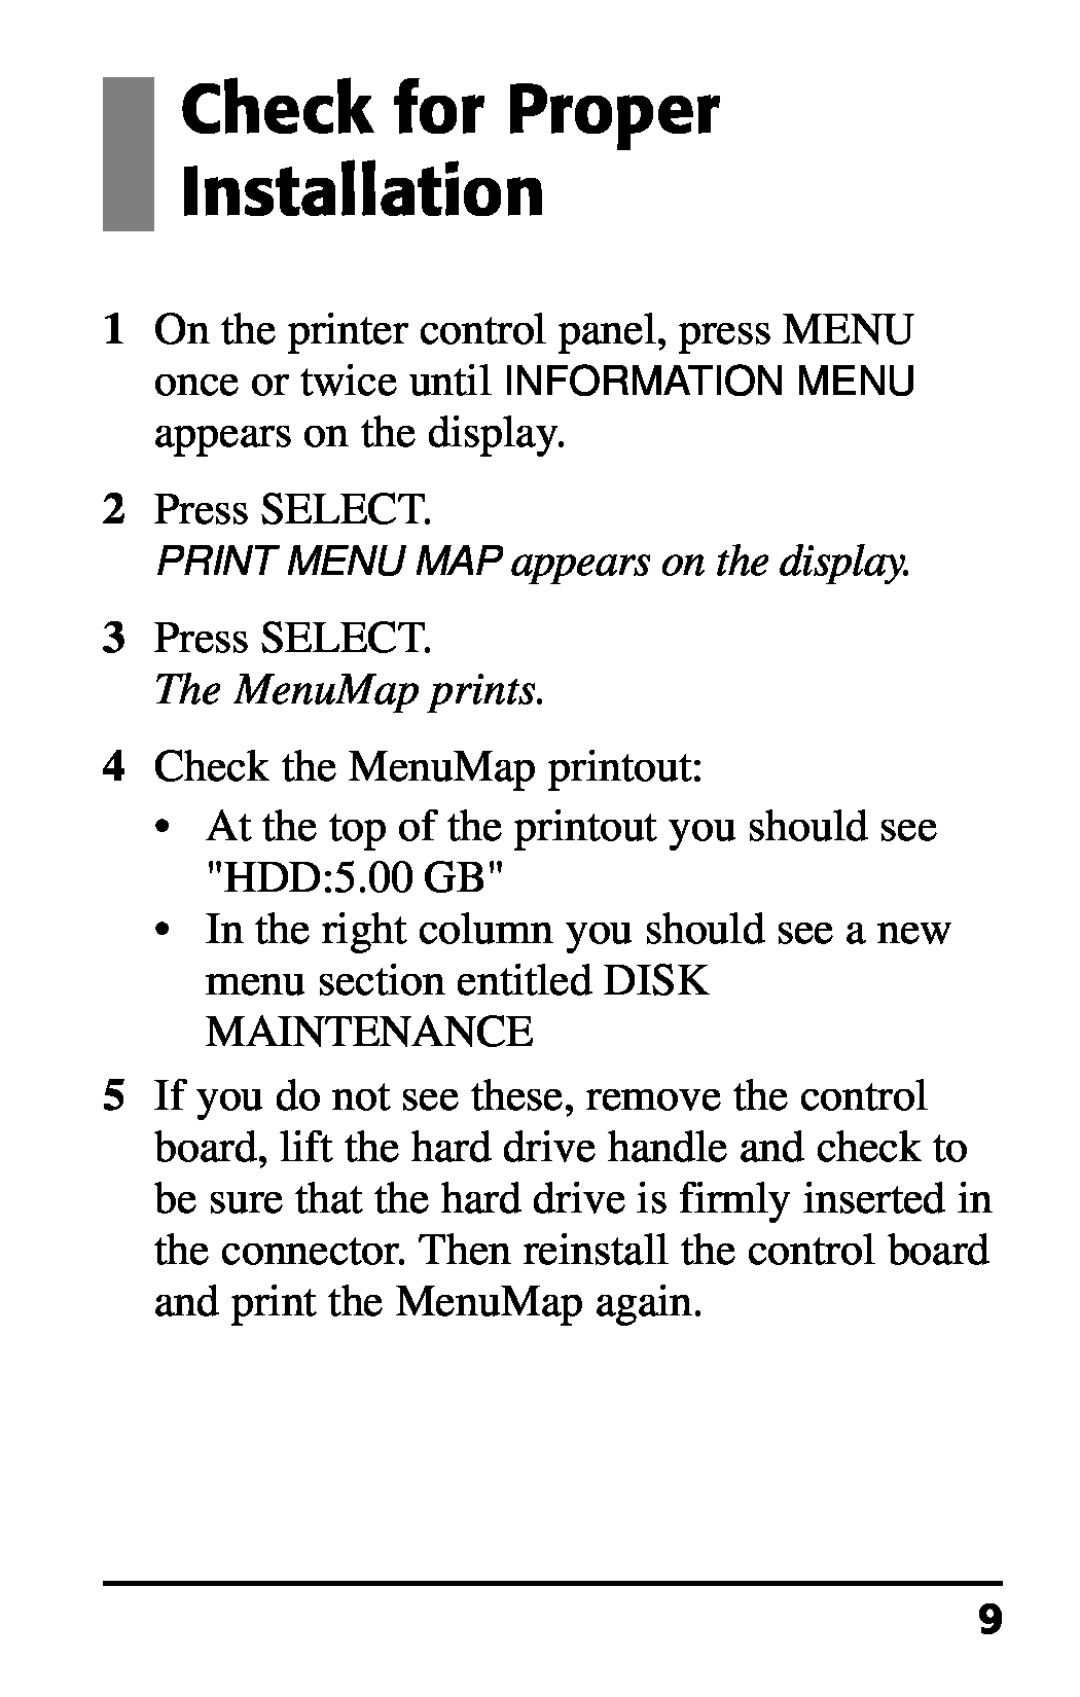 Oki 70037301 Check for Proper Installation, PRINT MENU MAP appears on the display, The MenuMap prints 